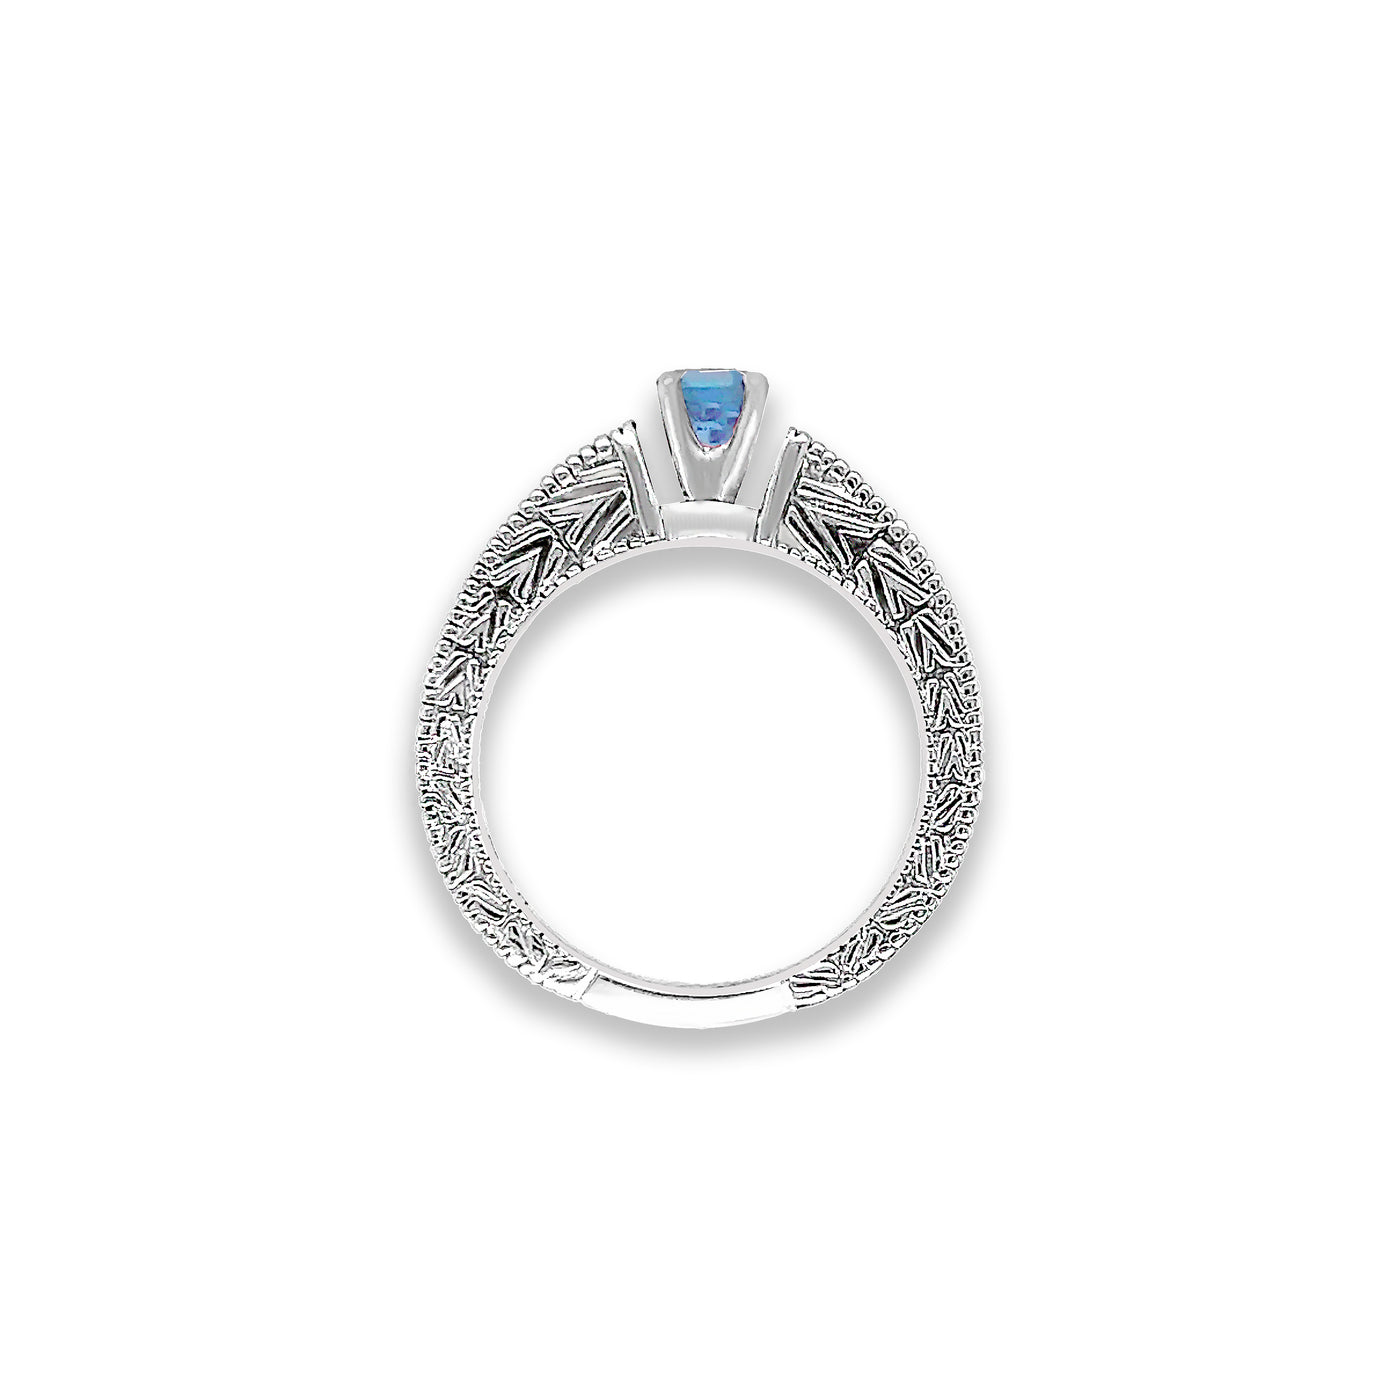 White Gold Sapphire and Diamond ring